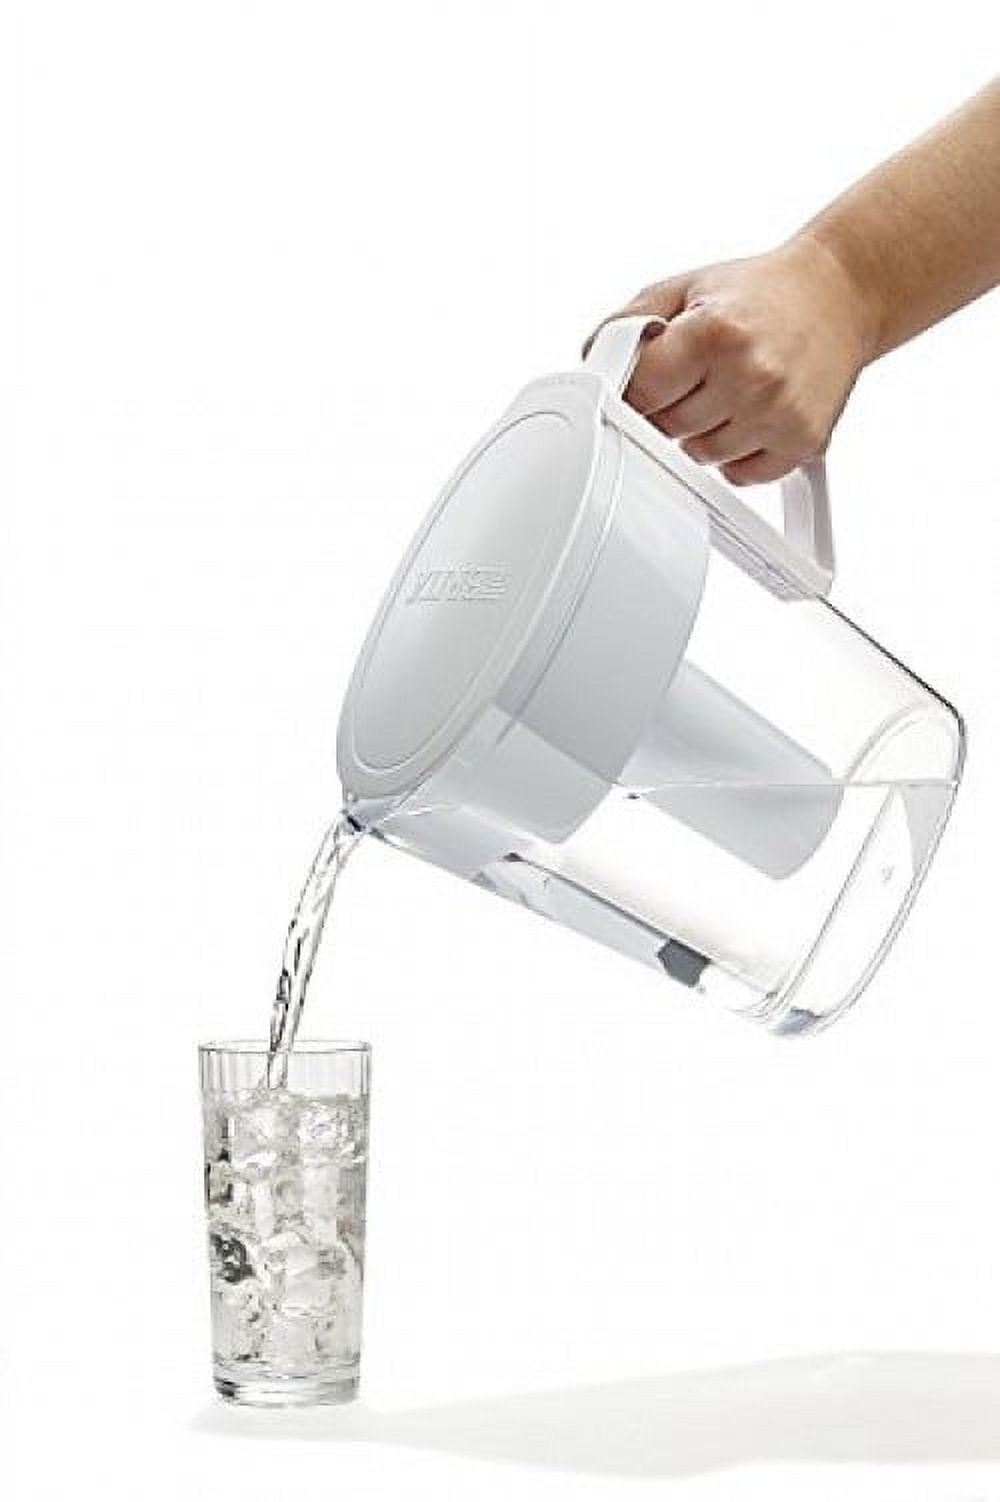 Brita Pitcher Water Filtration System, 5 Cup, Slim Model, Filter Included  60258426298